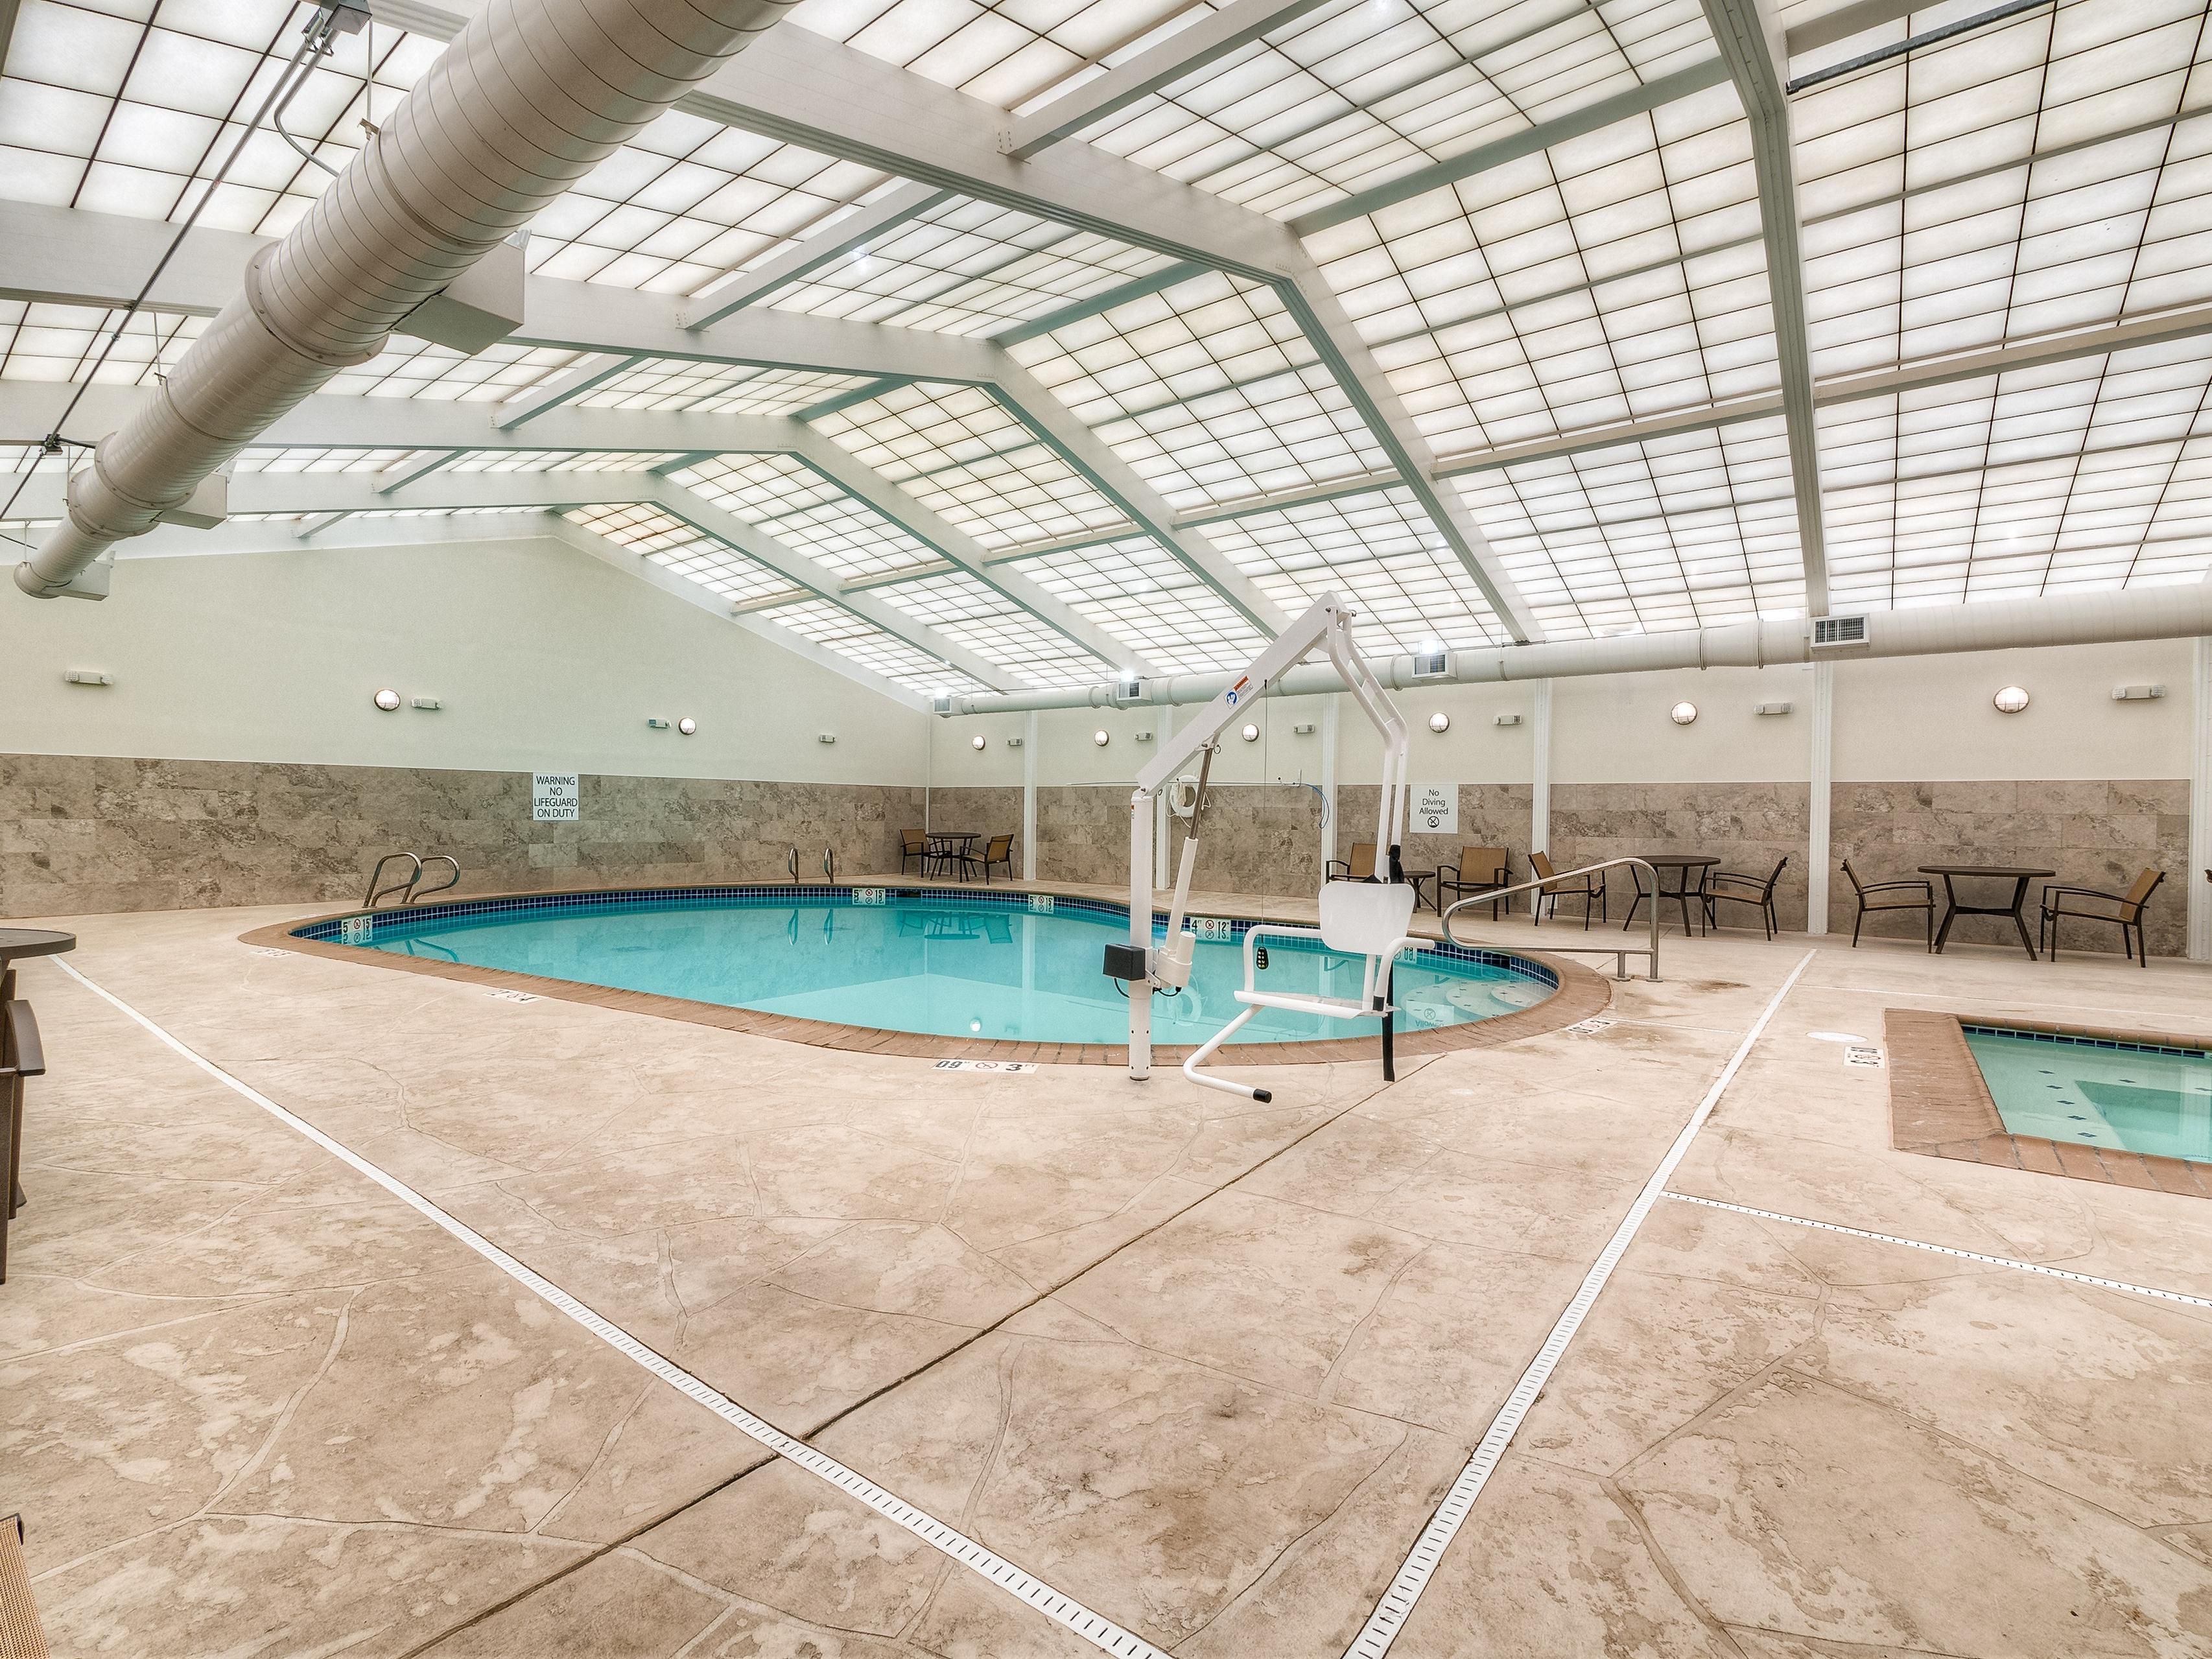 We have the largest indoor pool in Tacoma featuring an atrium roof for natural sunlight. All ages will enjoy our spacious, modern, and inviting pool and hot tub area.